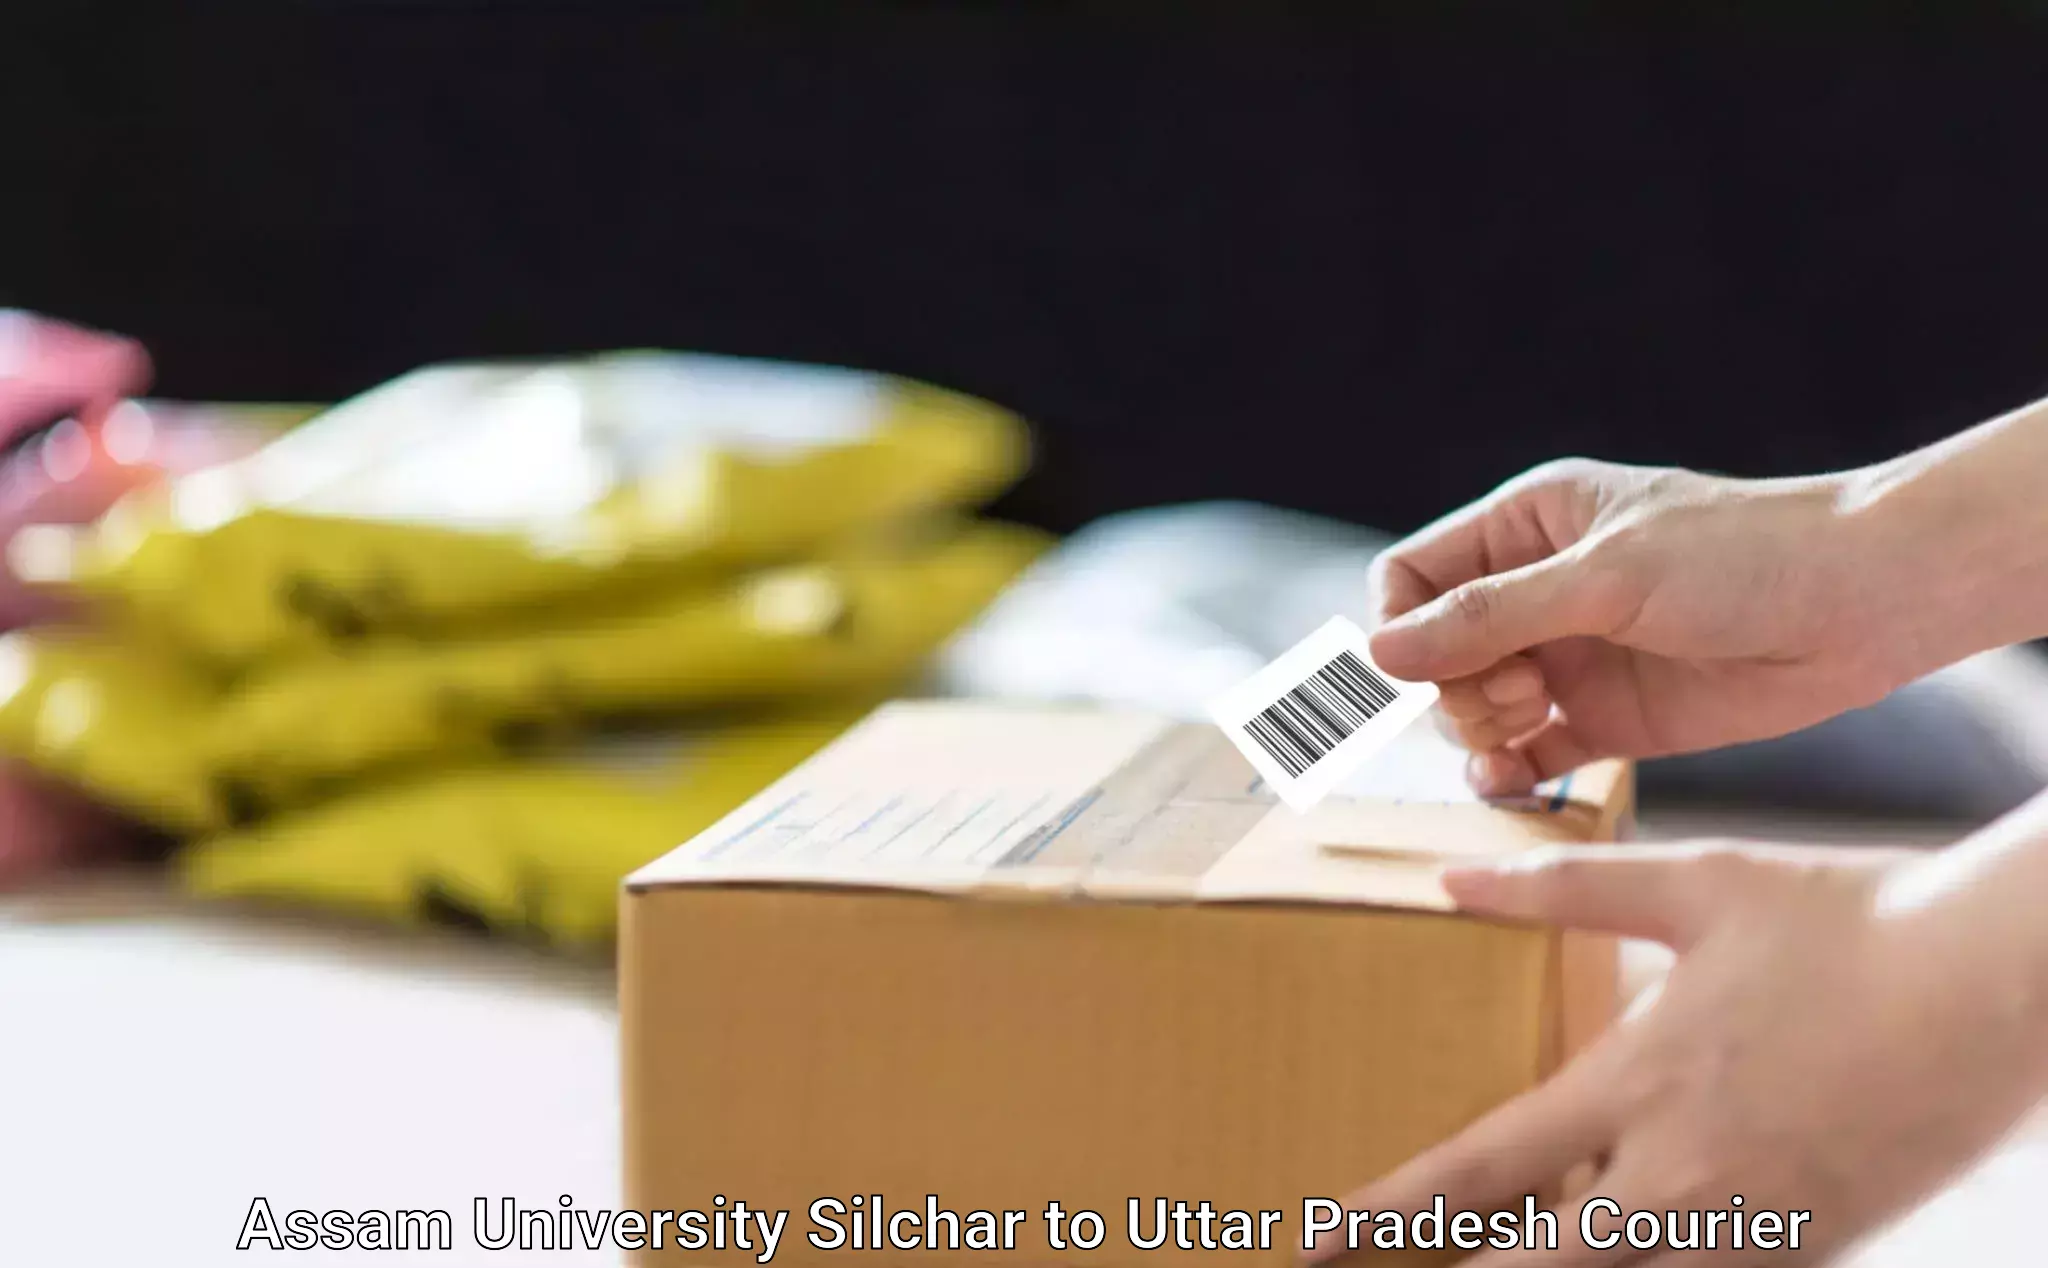 Professional courier services in Assam University Silchar to Orai